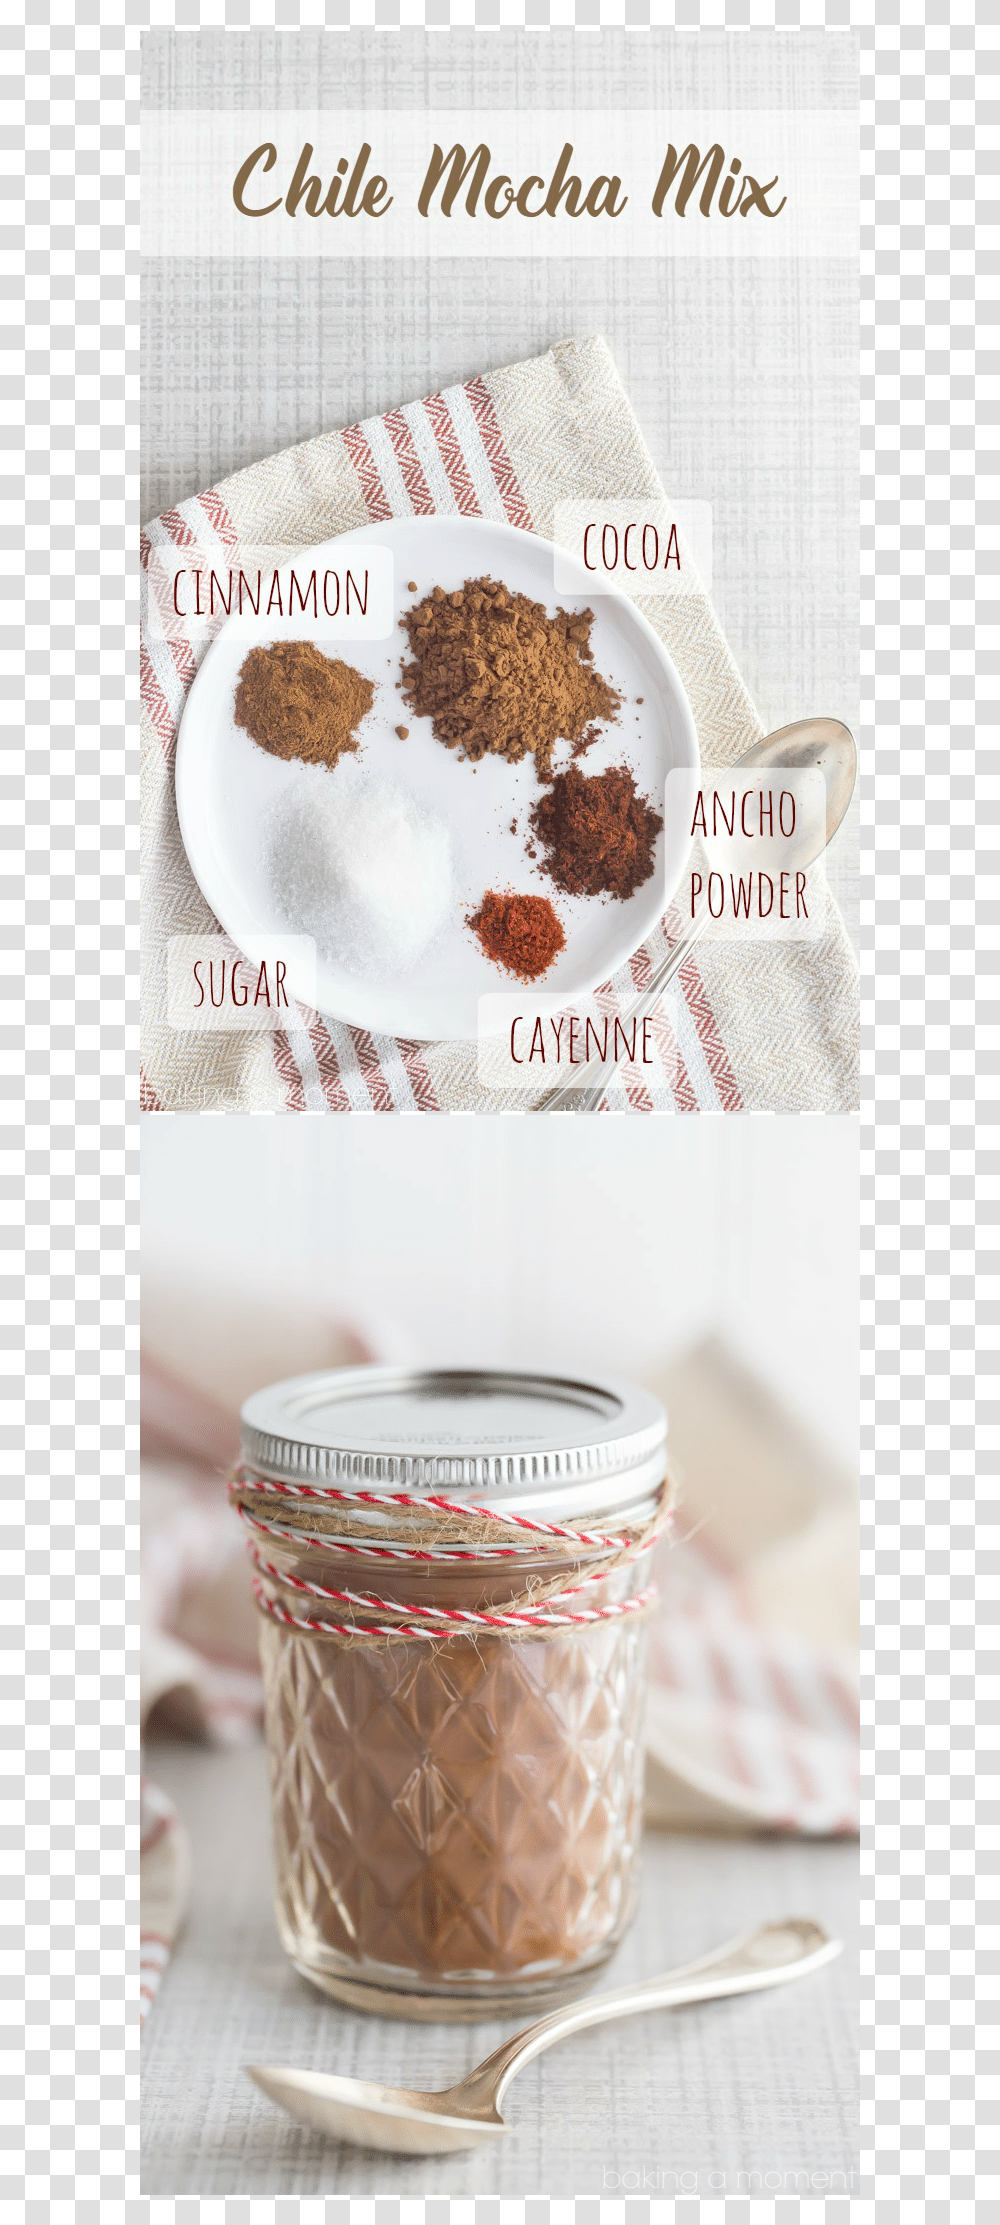 Chile Mocha Mix Just Add It To Your Regular Coffee Starbucks Spicy Powder, Spoon, Cutlery, Ice Cream, Dessert Transparent Png